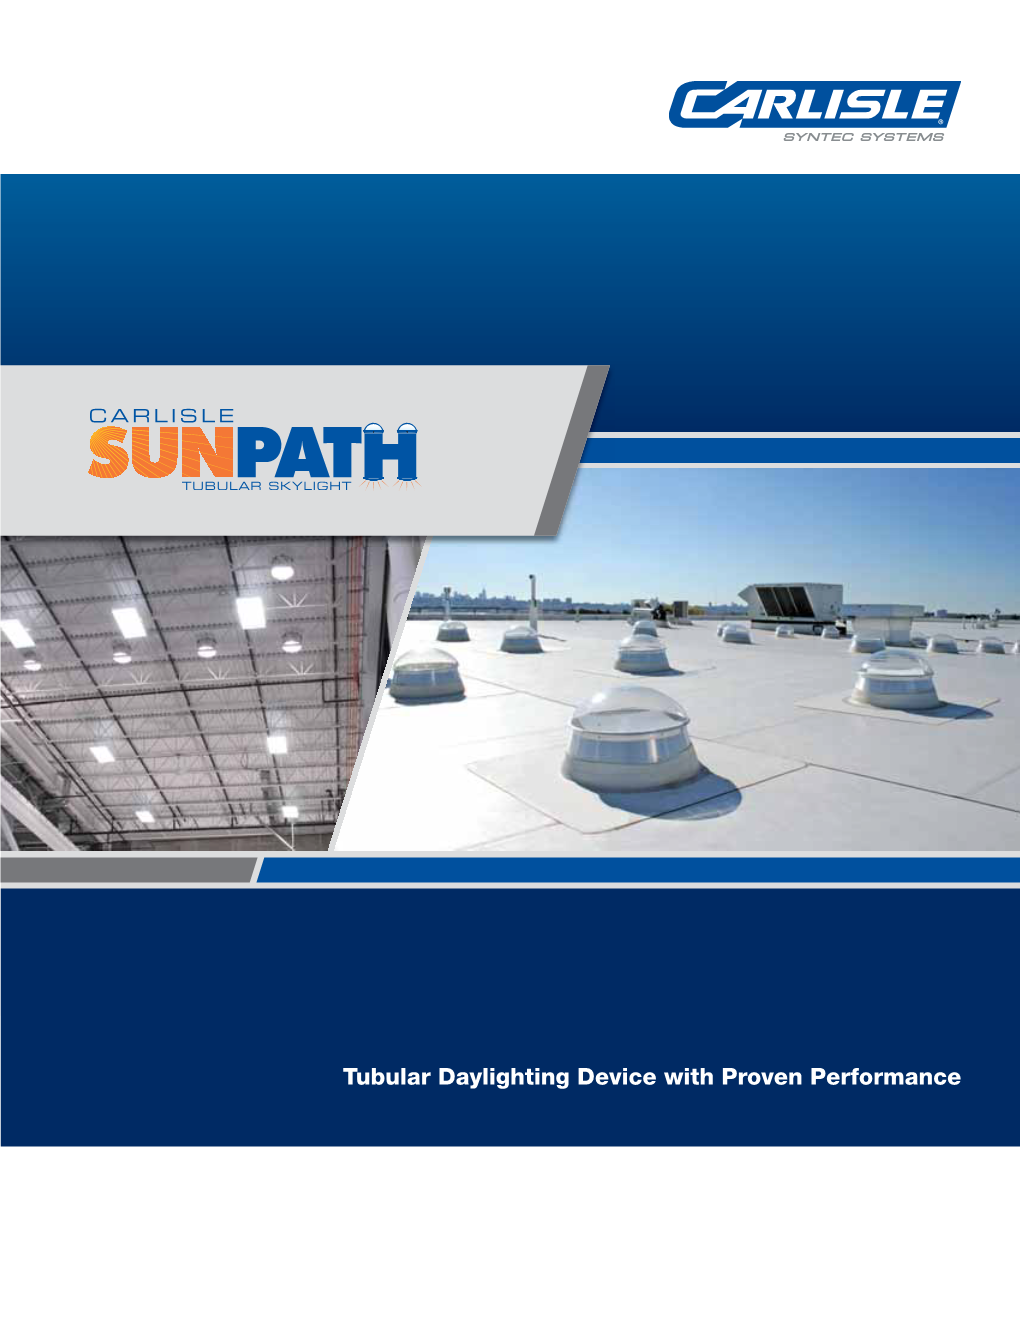 Sunpath Tubular Skylight Brochure” ENERGY STAR Is a Registered Trademark Owned by the US Government